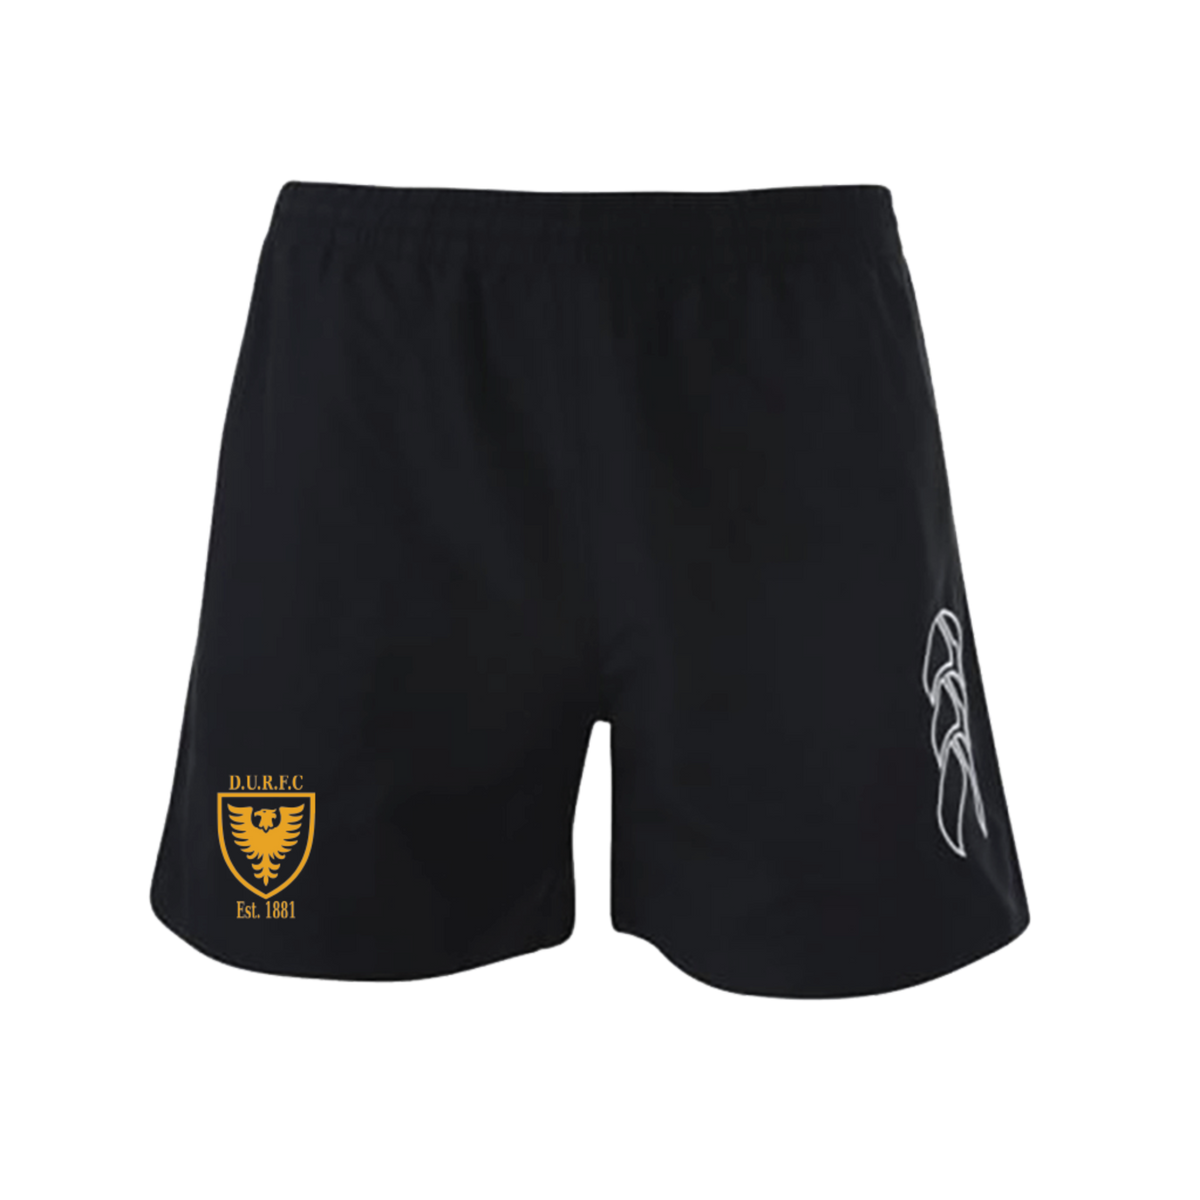 DURFC CCC Tactic Shorts - www.therugbyshop.com www.therugbyshop.com MENS / BLACK / XS TRS Distribution Canada SHORTS DURFC CCC Tactic Shorts